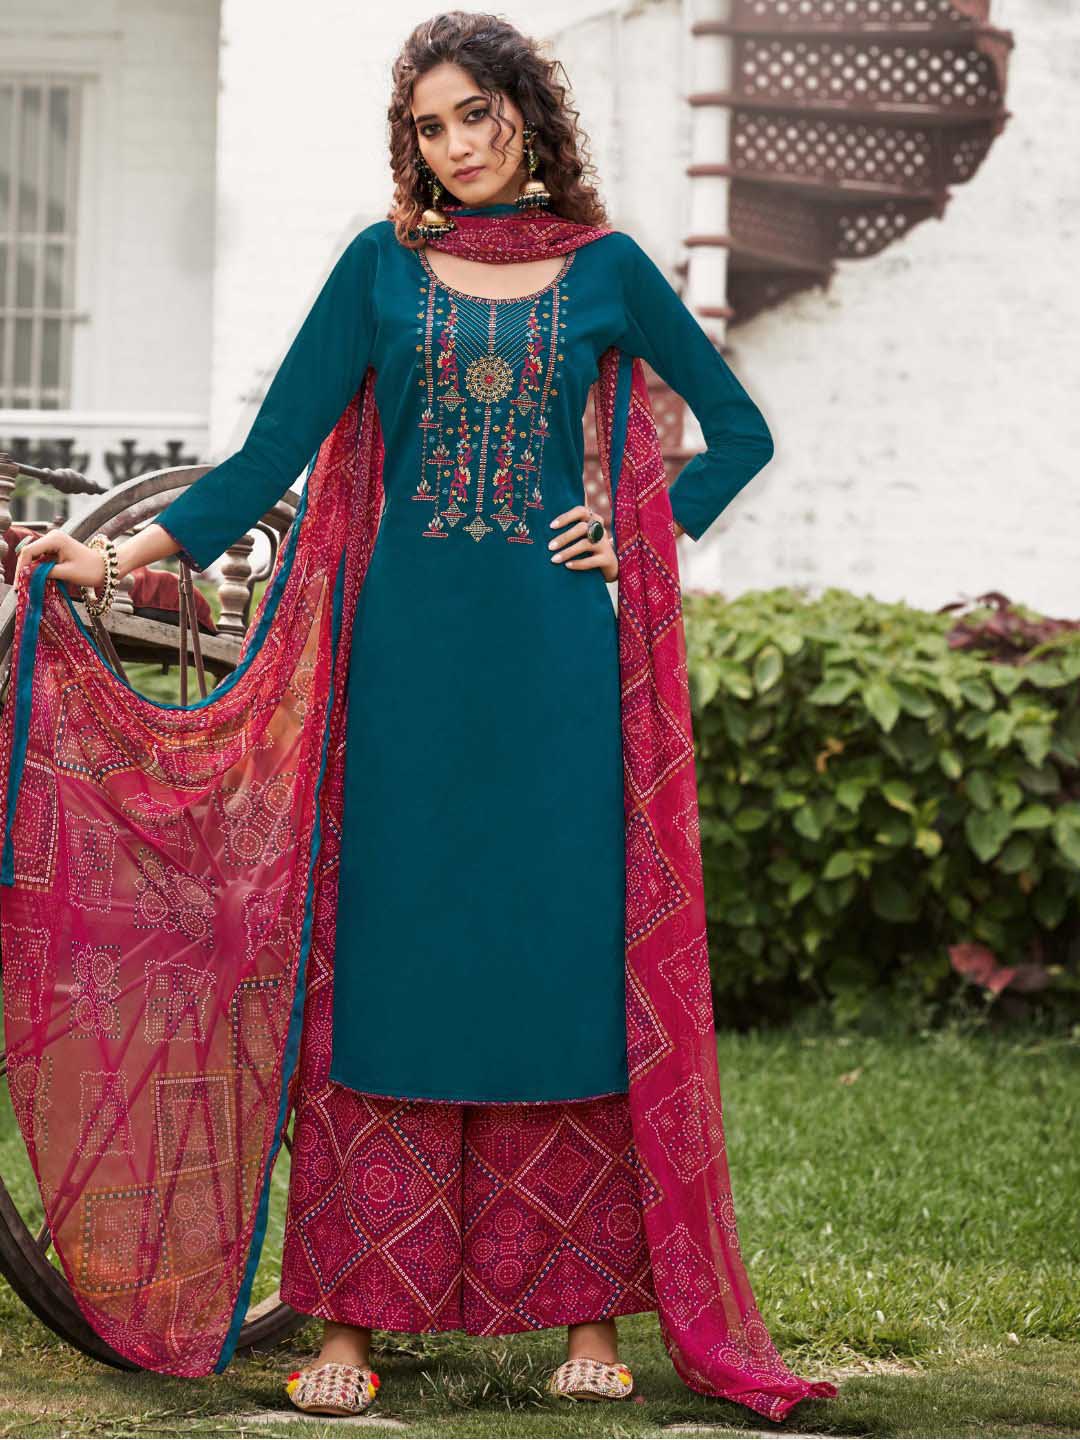 Unstitched Cotton Salwar Suit Fabric Material with Embroidery